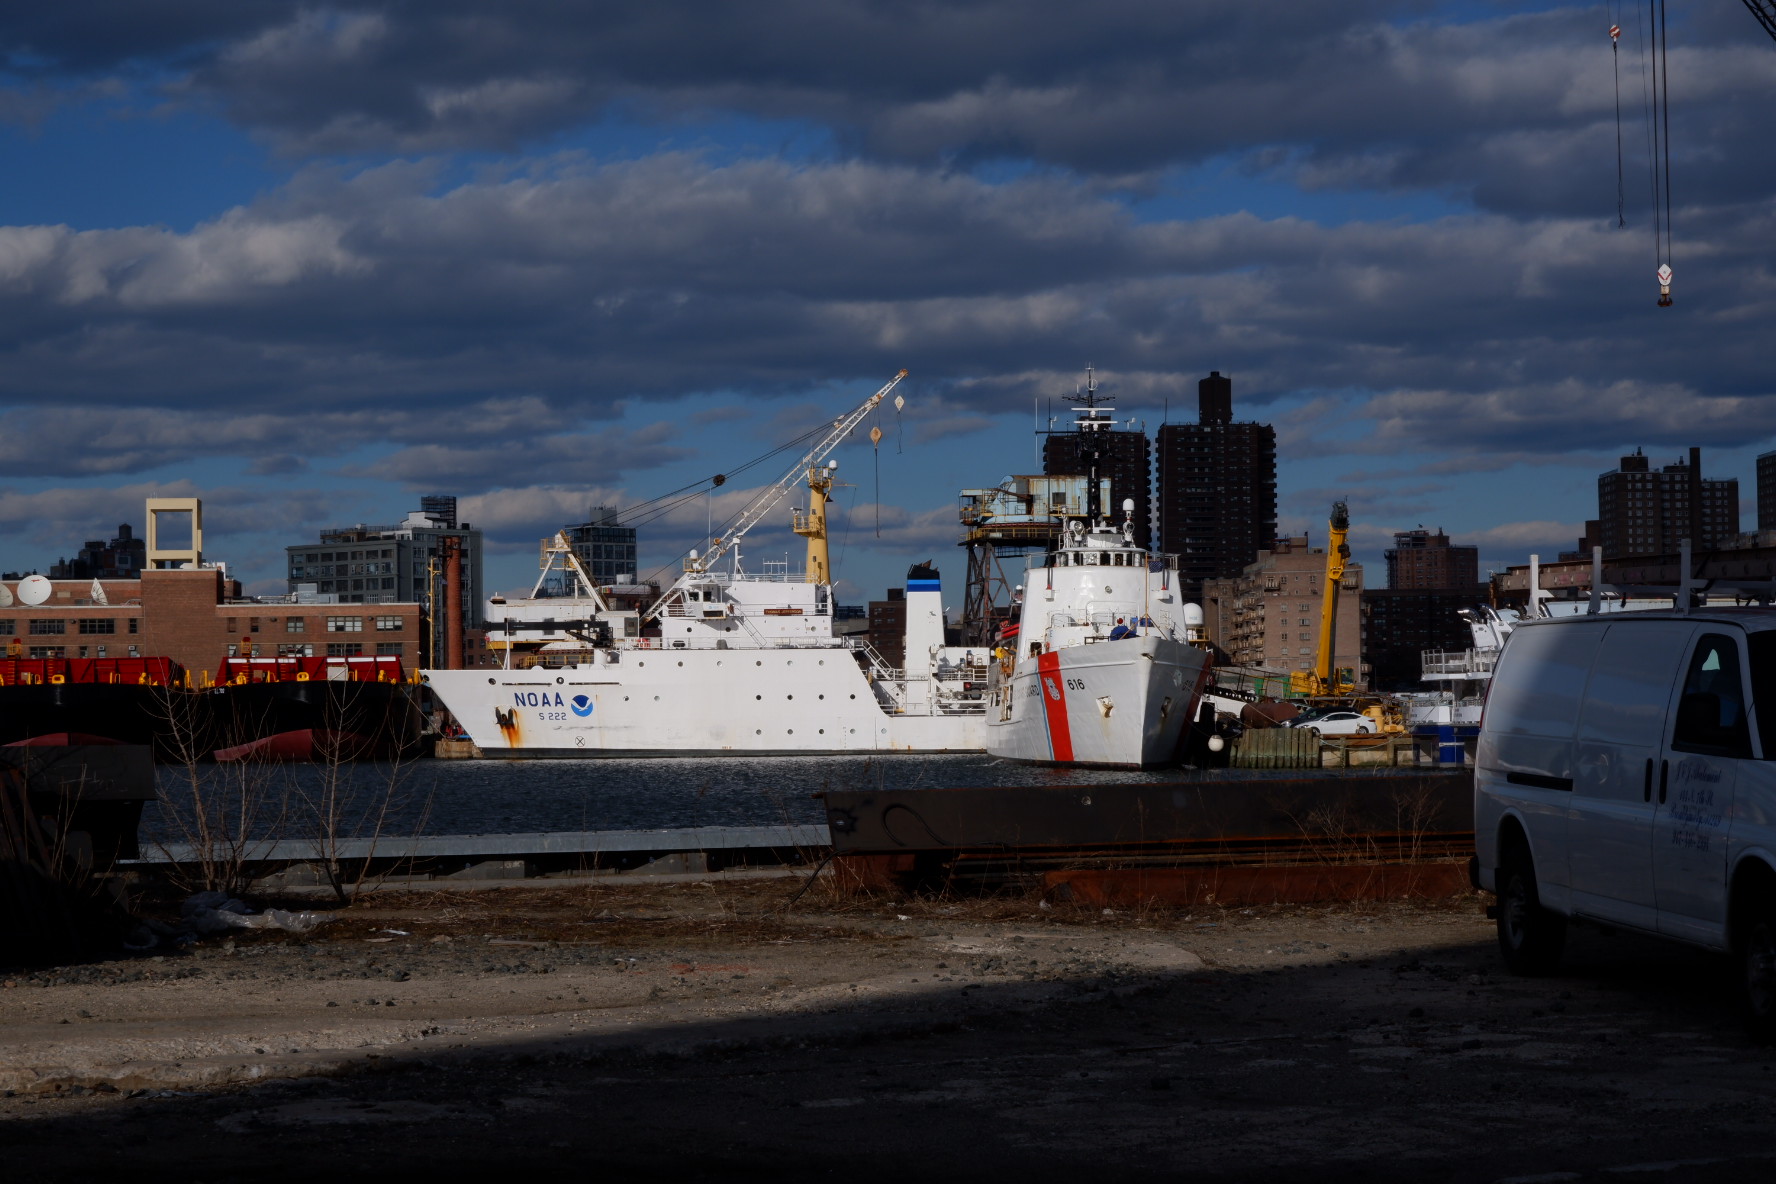 White NOAA survey ship and white US Coast Guard ship in Wallabout Bay